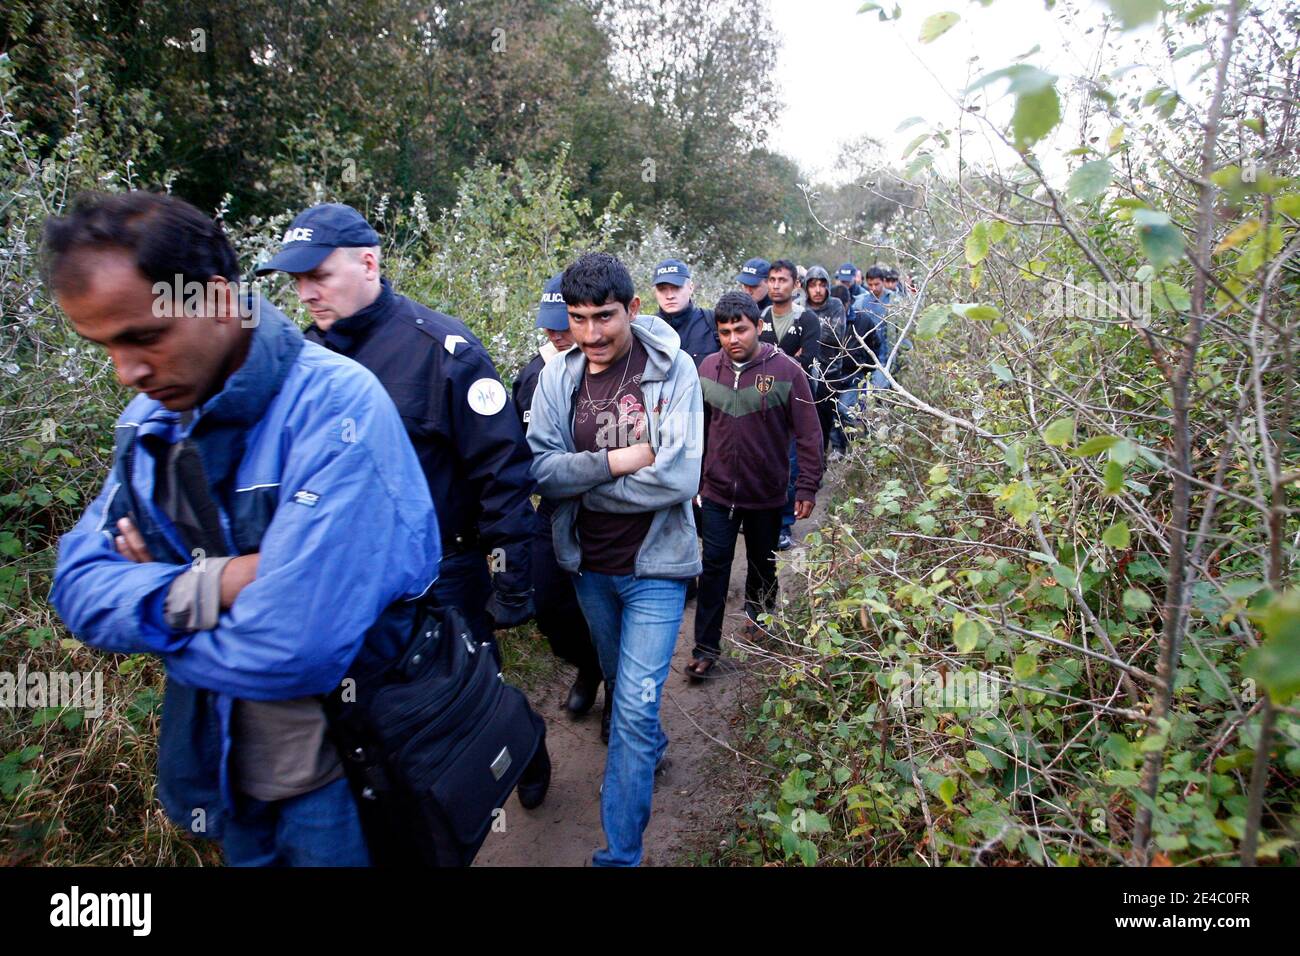 French gendarmes and police officers block a would-be-immigrant in a wooded area known as 'the jungle' in Calais, northern France, on September 22, 2009, as they dismantle the makeshift tent camp. The French government announced on September 16, 2009 that Stock Photo